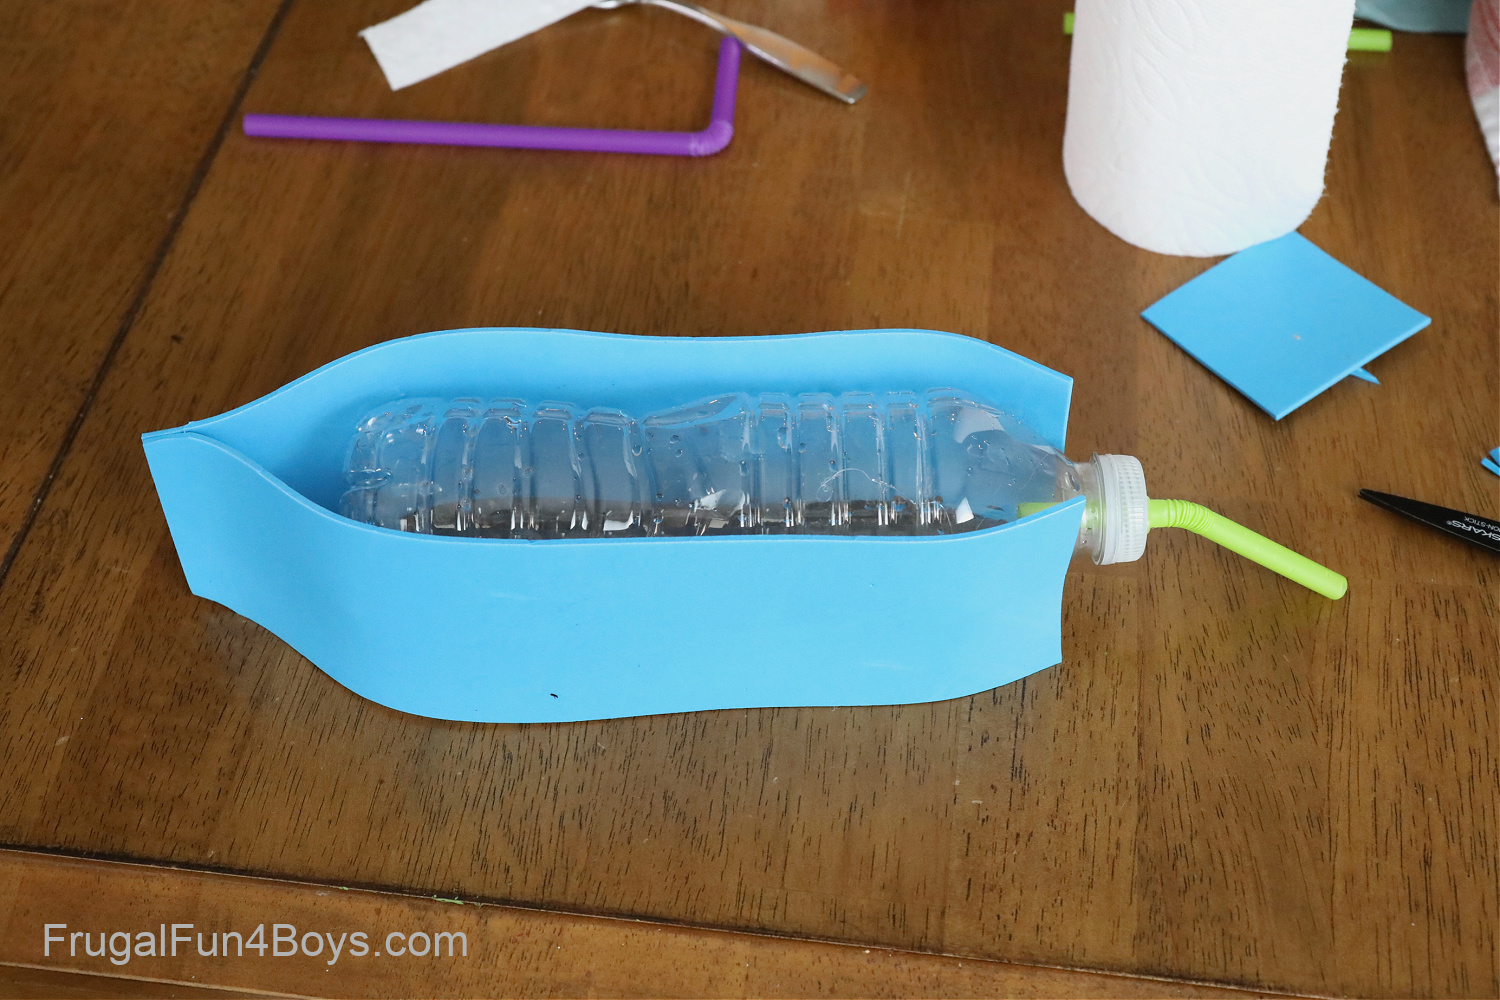 How to build a baking soda and vinegar powered boat